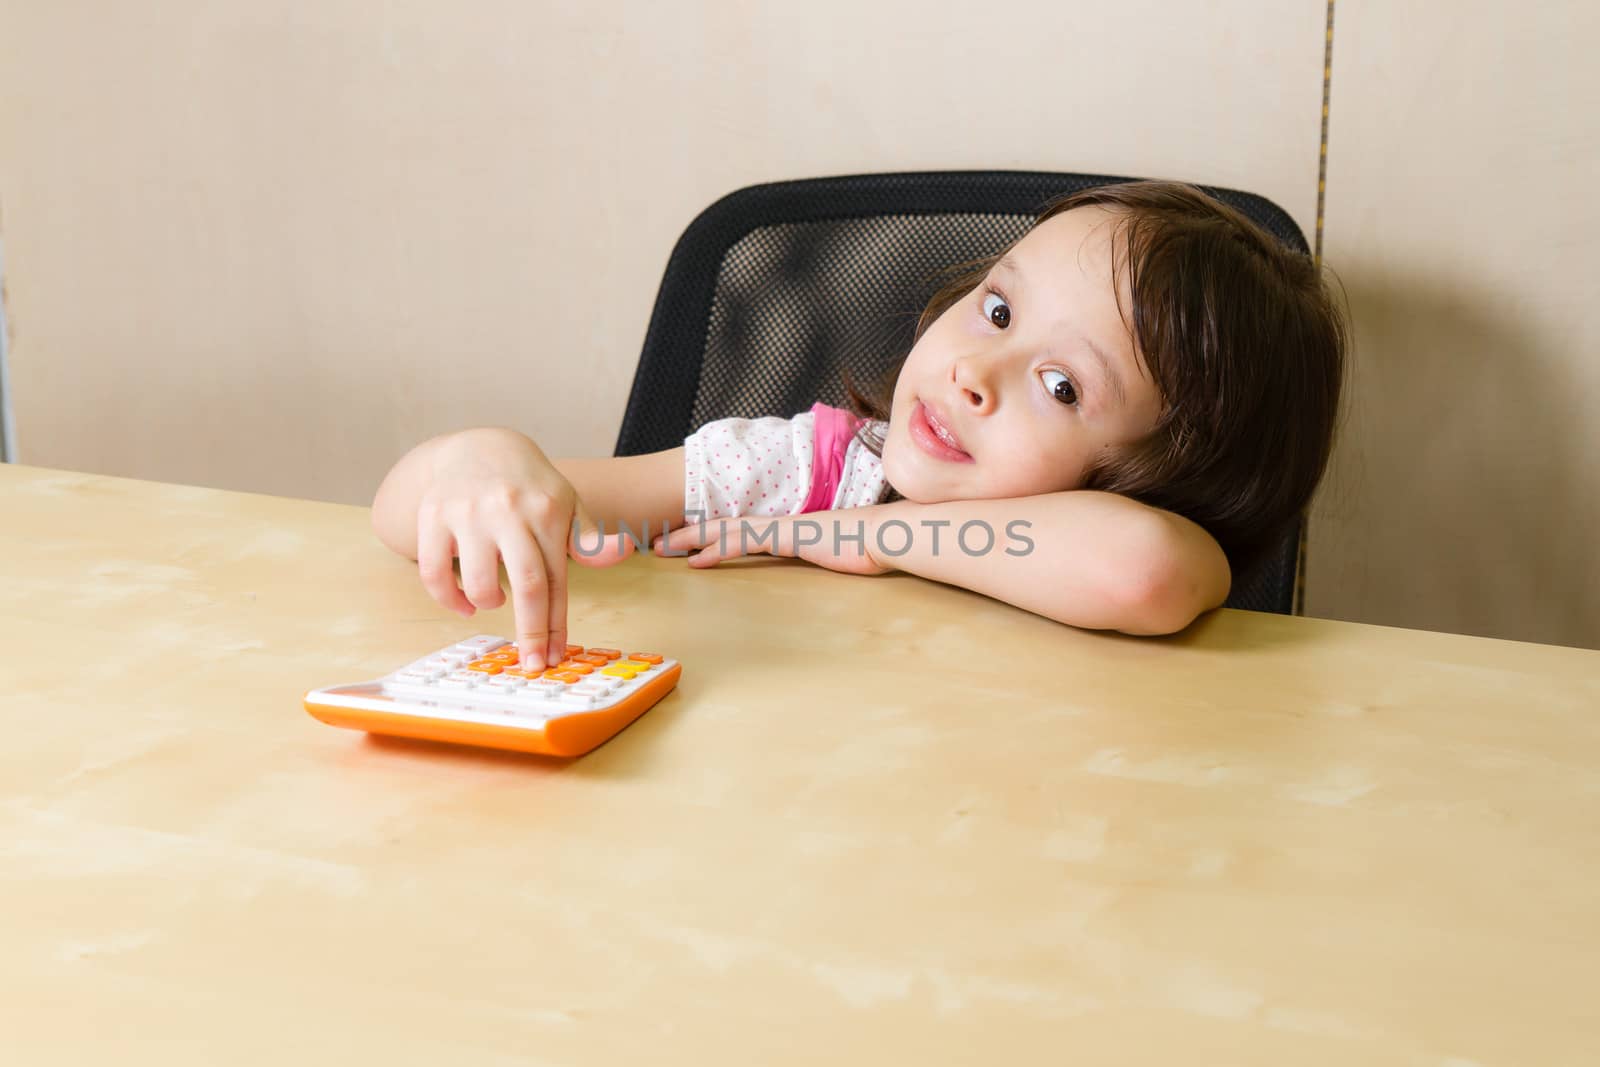 Child with calculator in corporate office